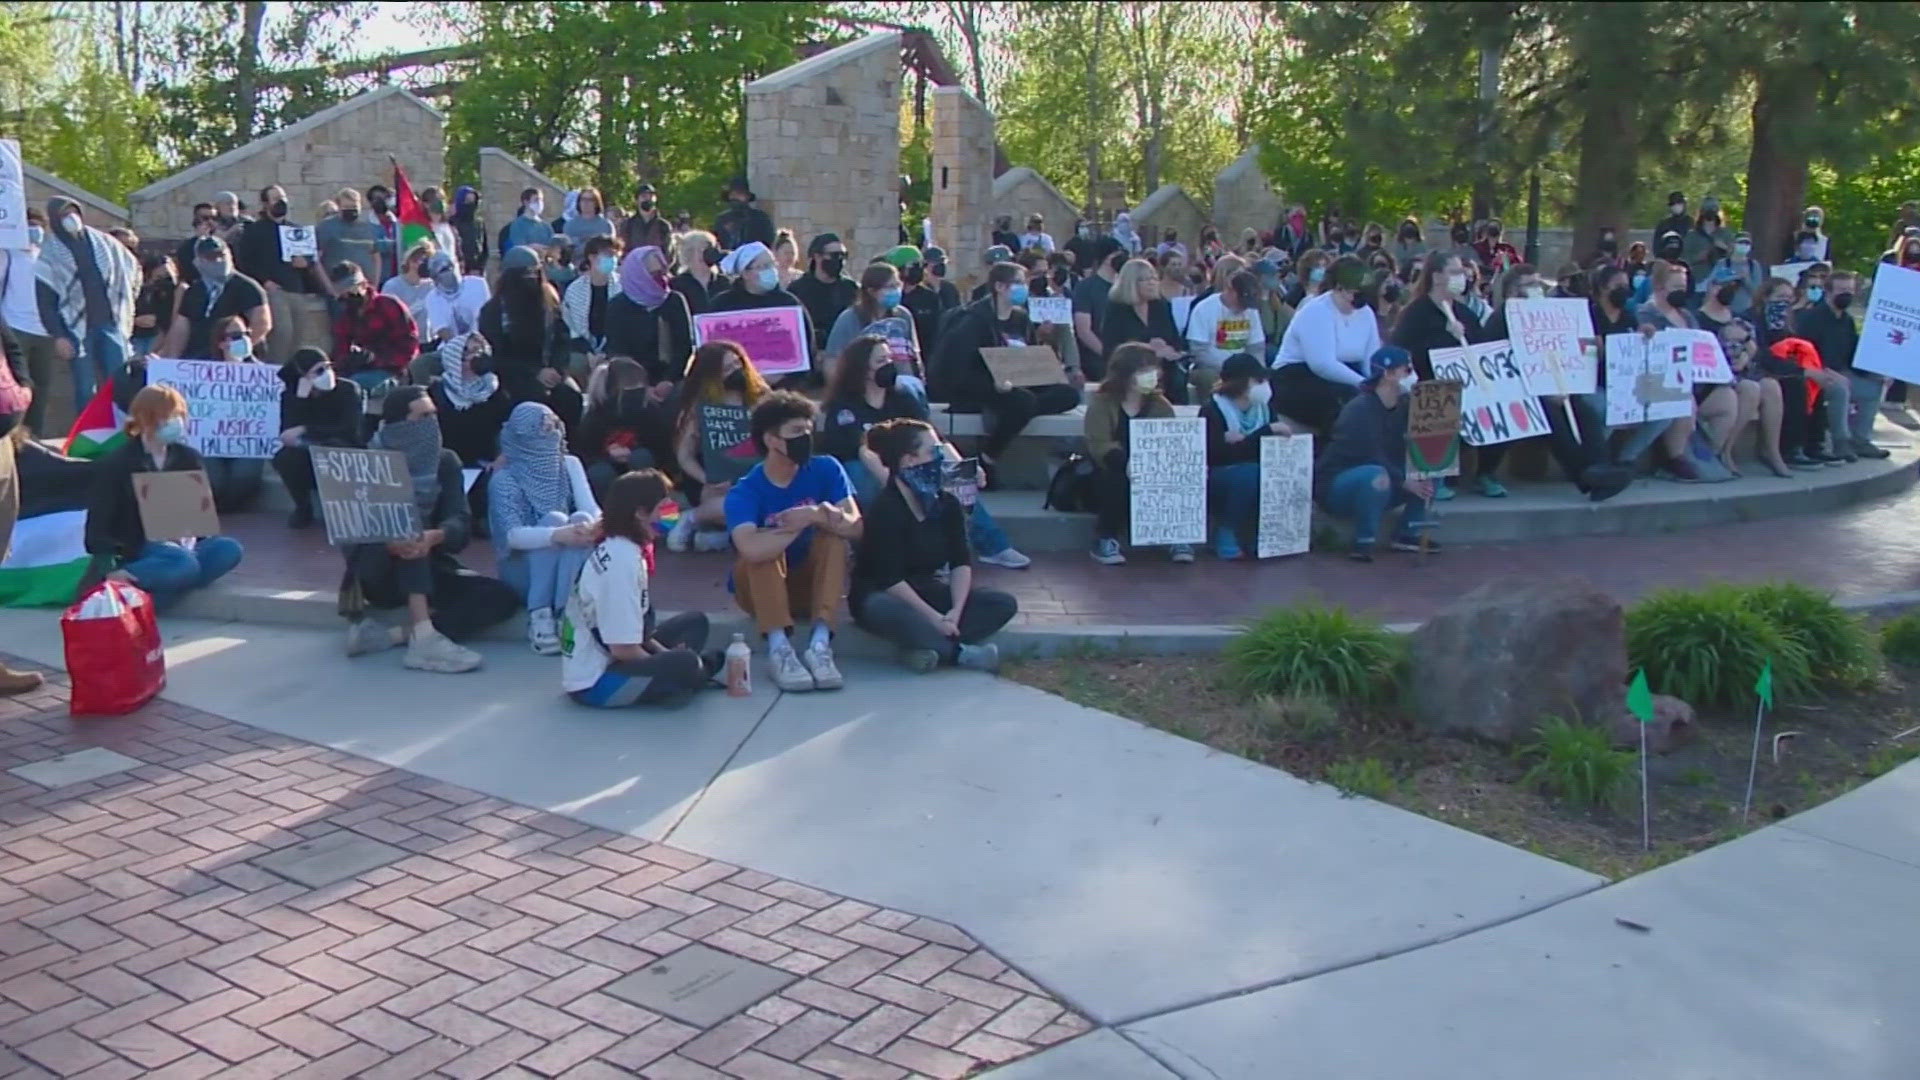 On Friday, pro-Palestine protesters held a rally in downtown Boise and marched to the state capitol.